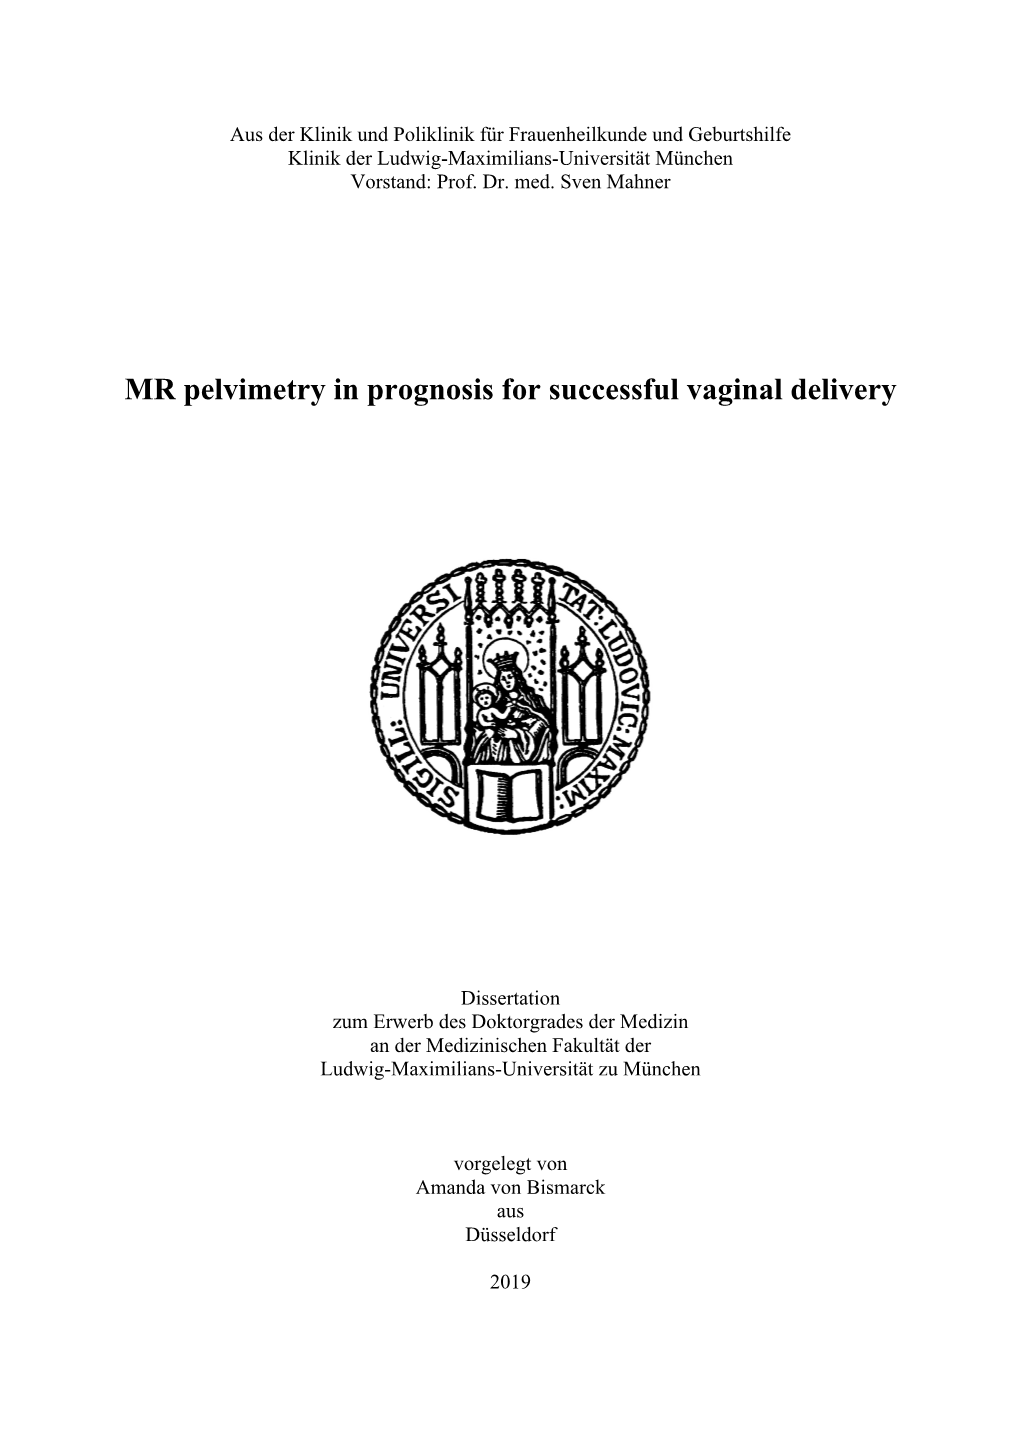 MR Pelvimetry in Prognosis for Successful Vaginal Delivery